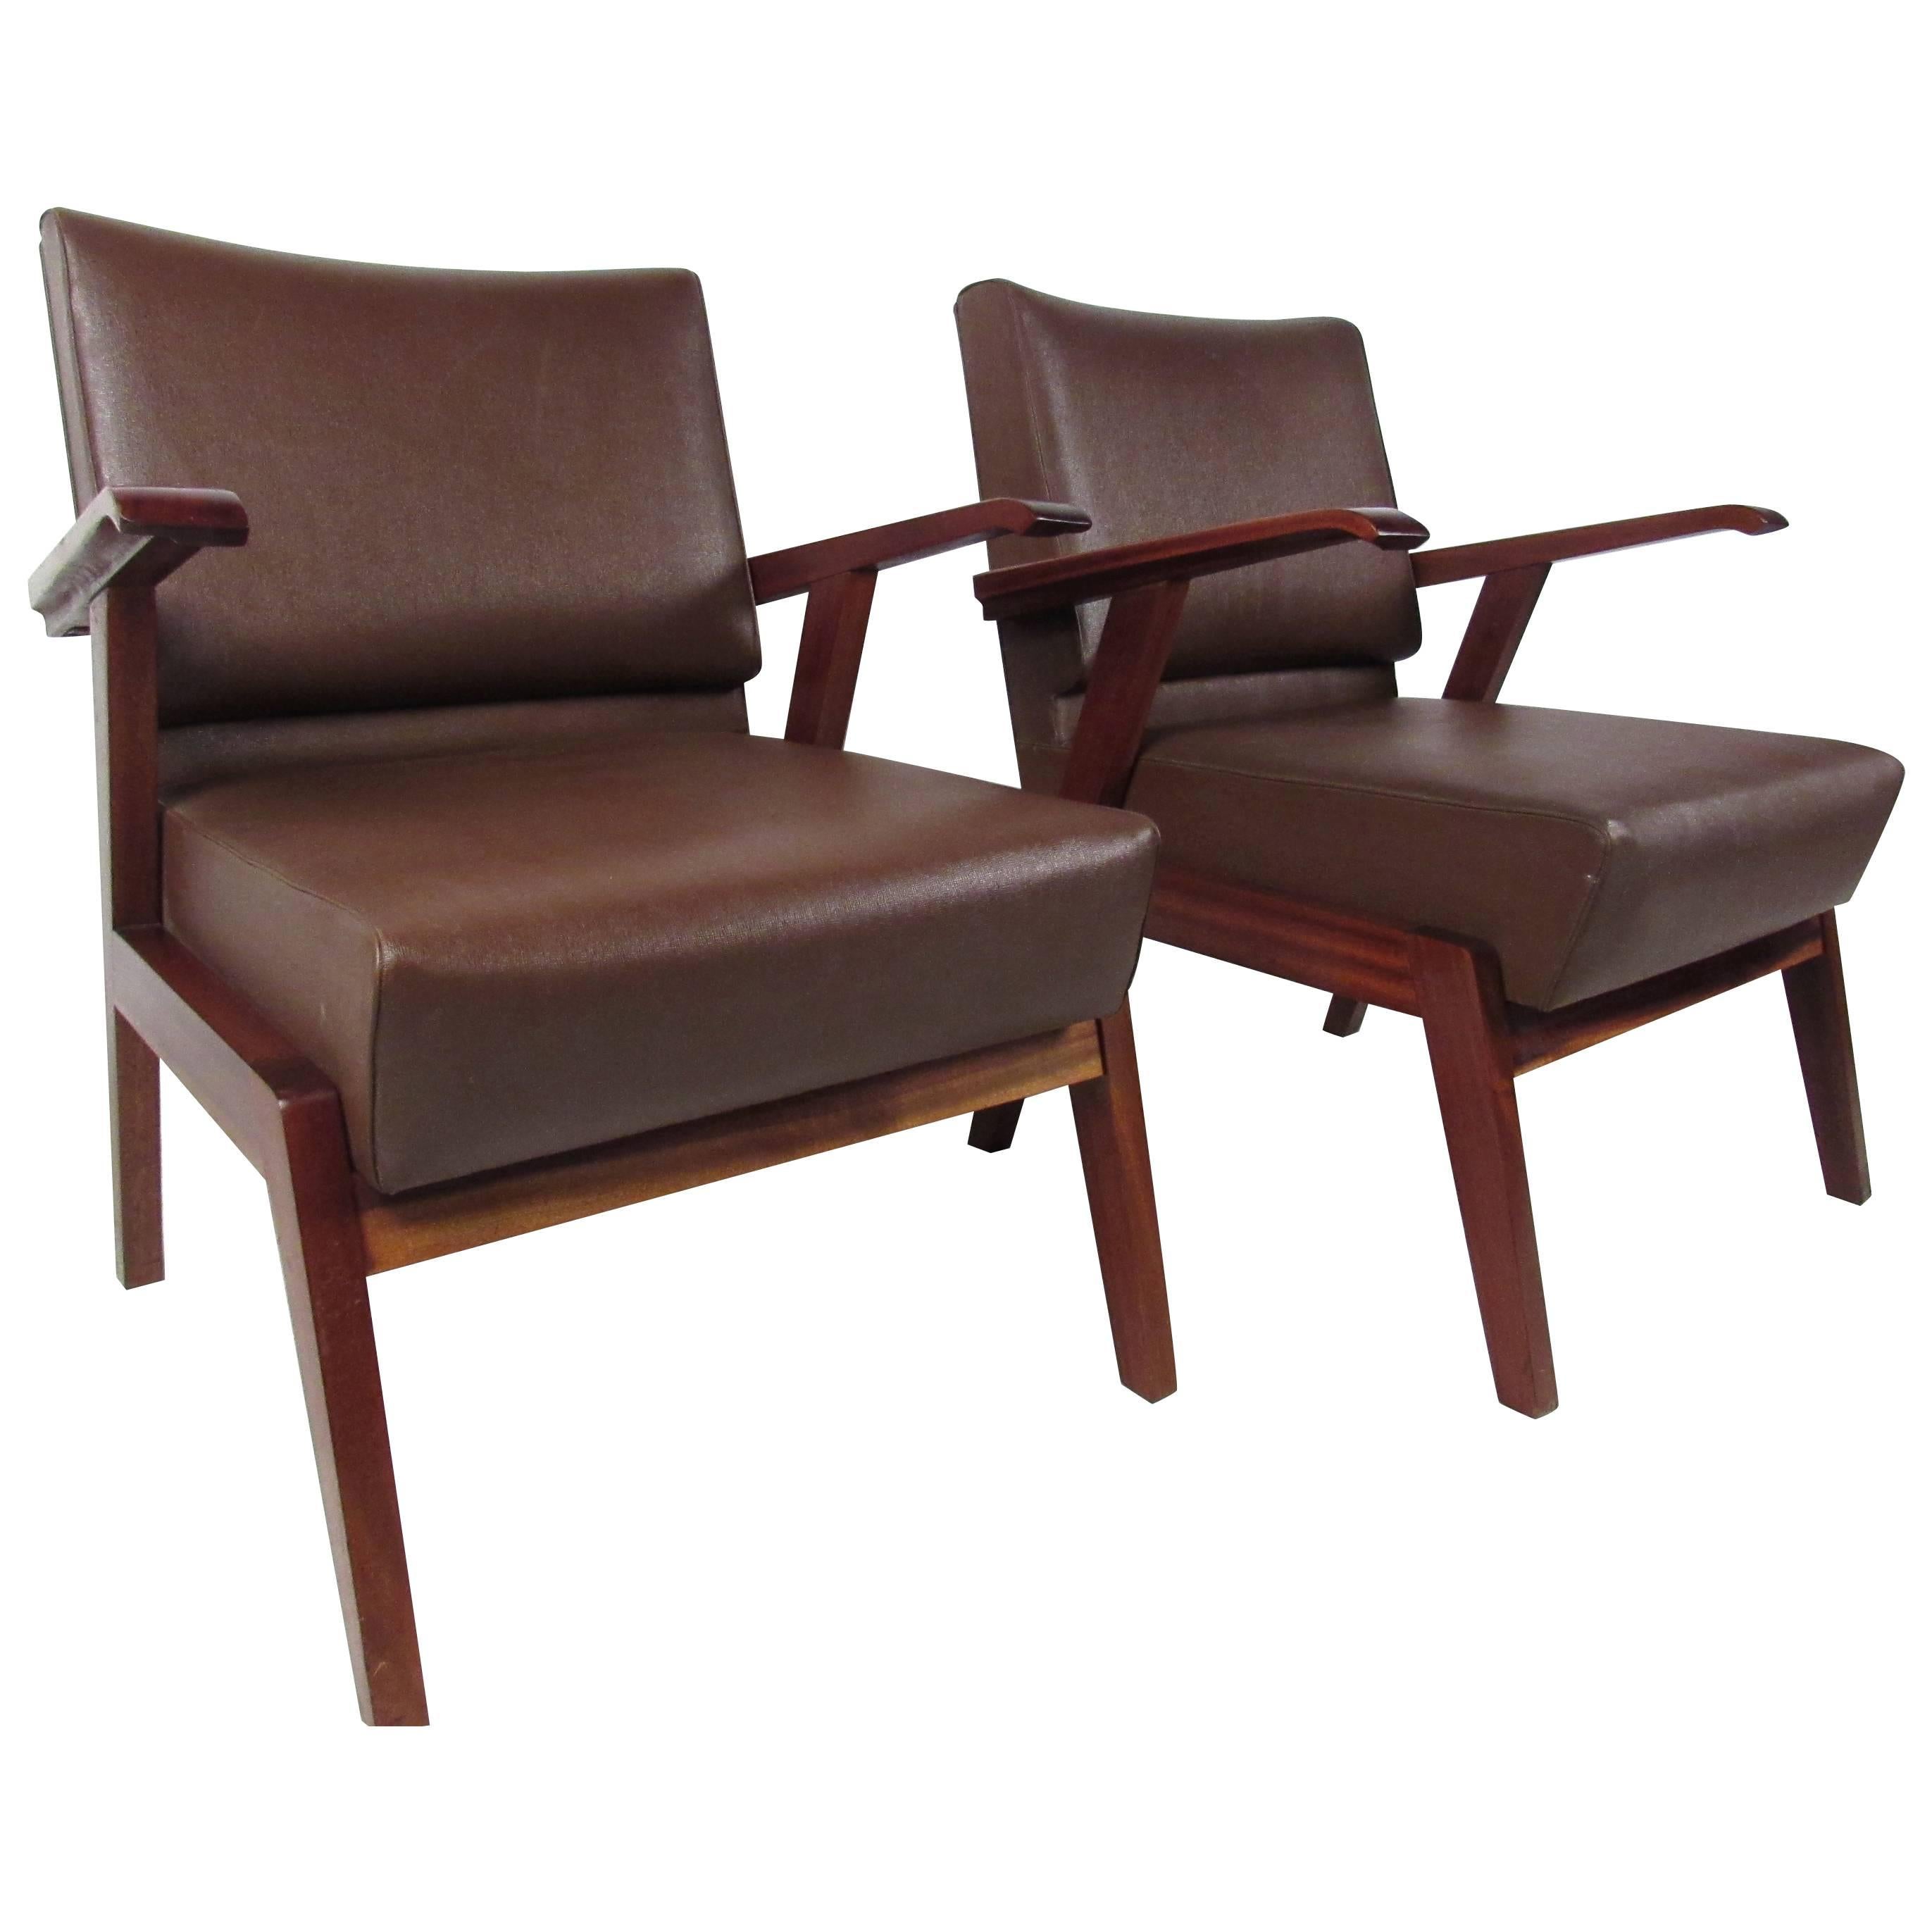 Pair of Unique Mid-Century Modern Italian Floating Armchairs For Sale